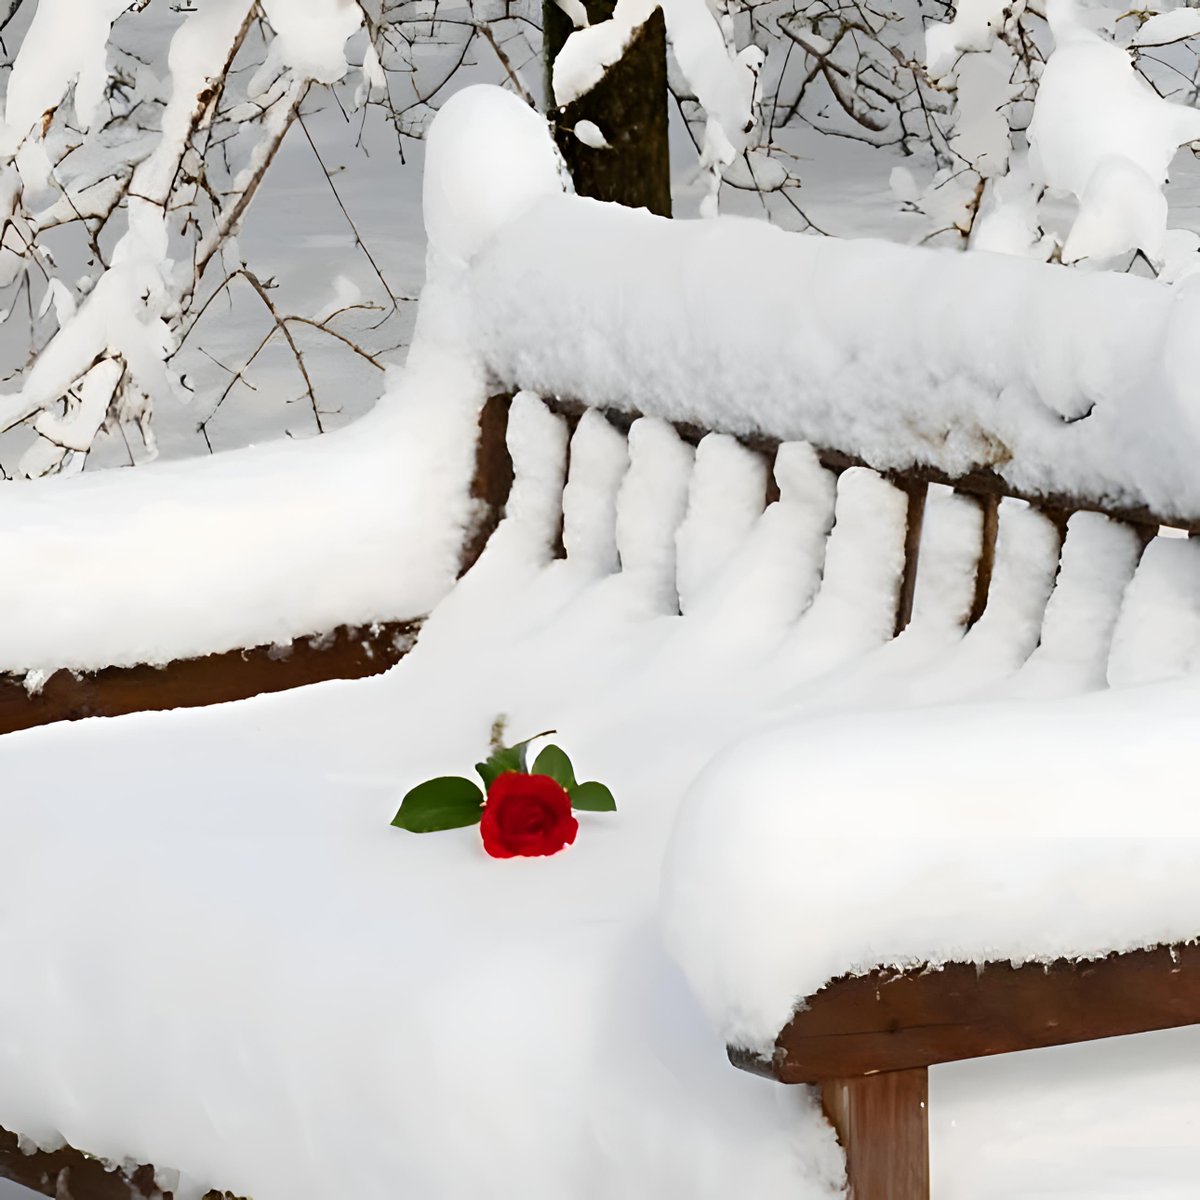 In a winter's hush, a lone red rose, Rests on a bench where snowflakes doze. Crimson warmth amid the cold, A tale of beauty gently told. #WinterRoseMagic #SnowBenchBlooms #NatureElegance #ScarletSilence #ChilledBeauty